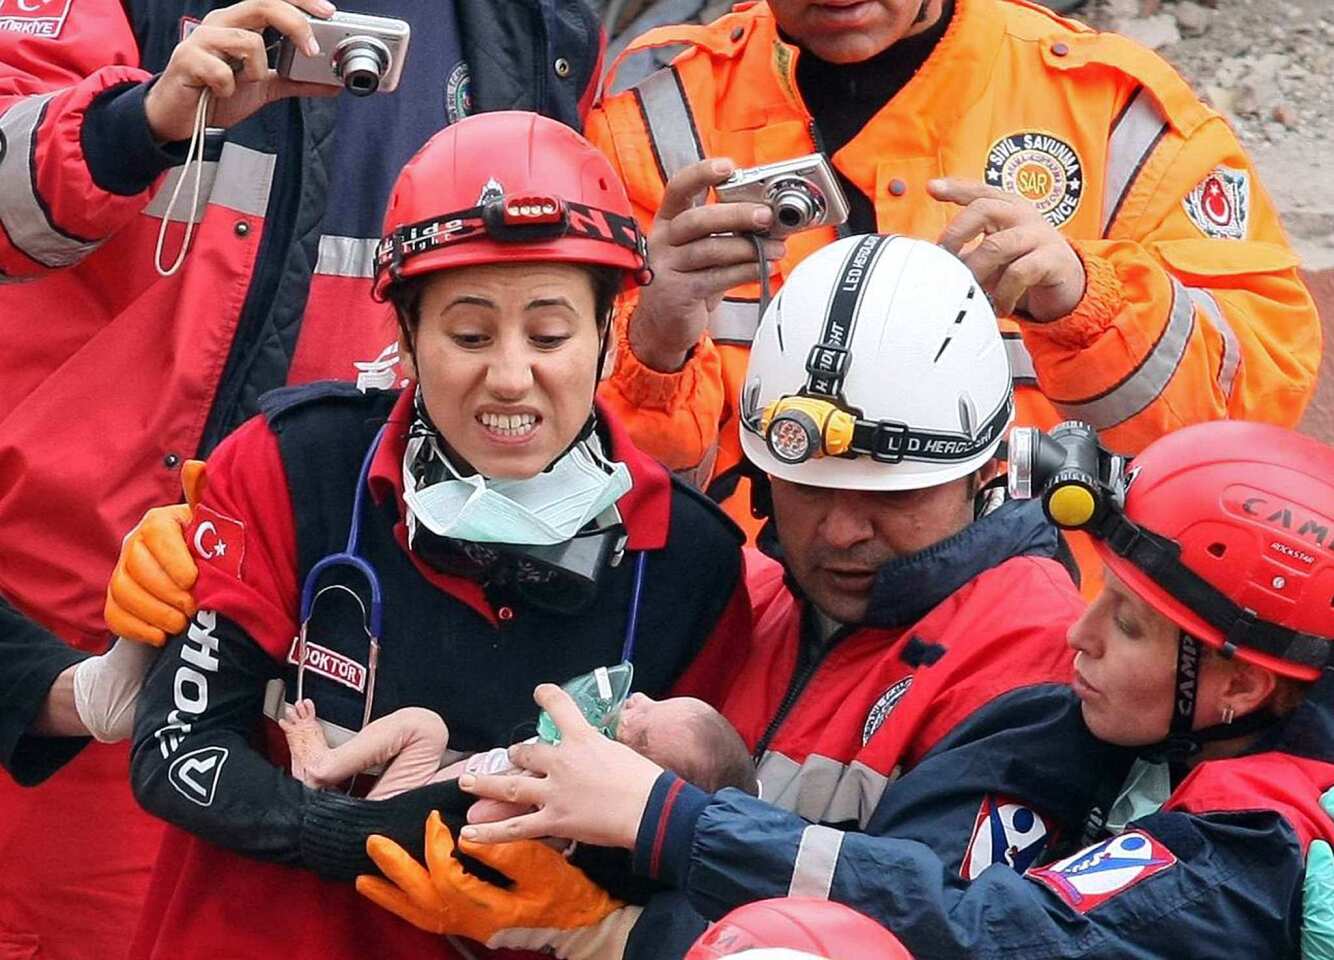 Forty-eight hours after the magnitude 7.1 earthquake quake in Turkey, 2-week-old Azra Karaduman was pulled alive from the rubble. Infant, her mother pulled from wreckage of earthquake in Turkey